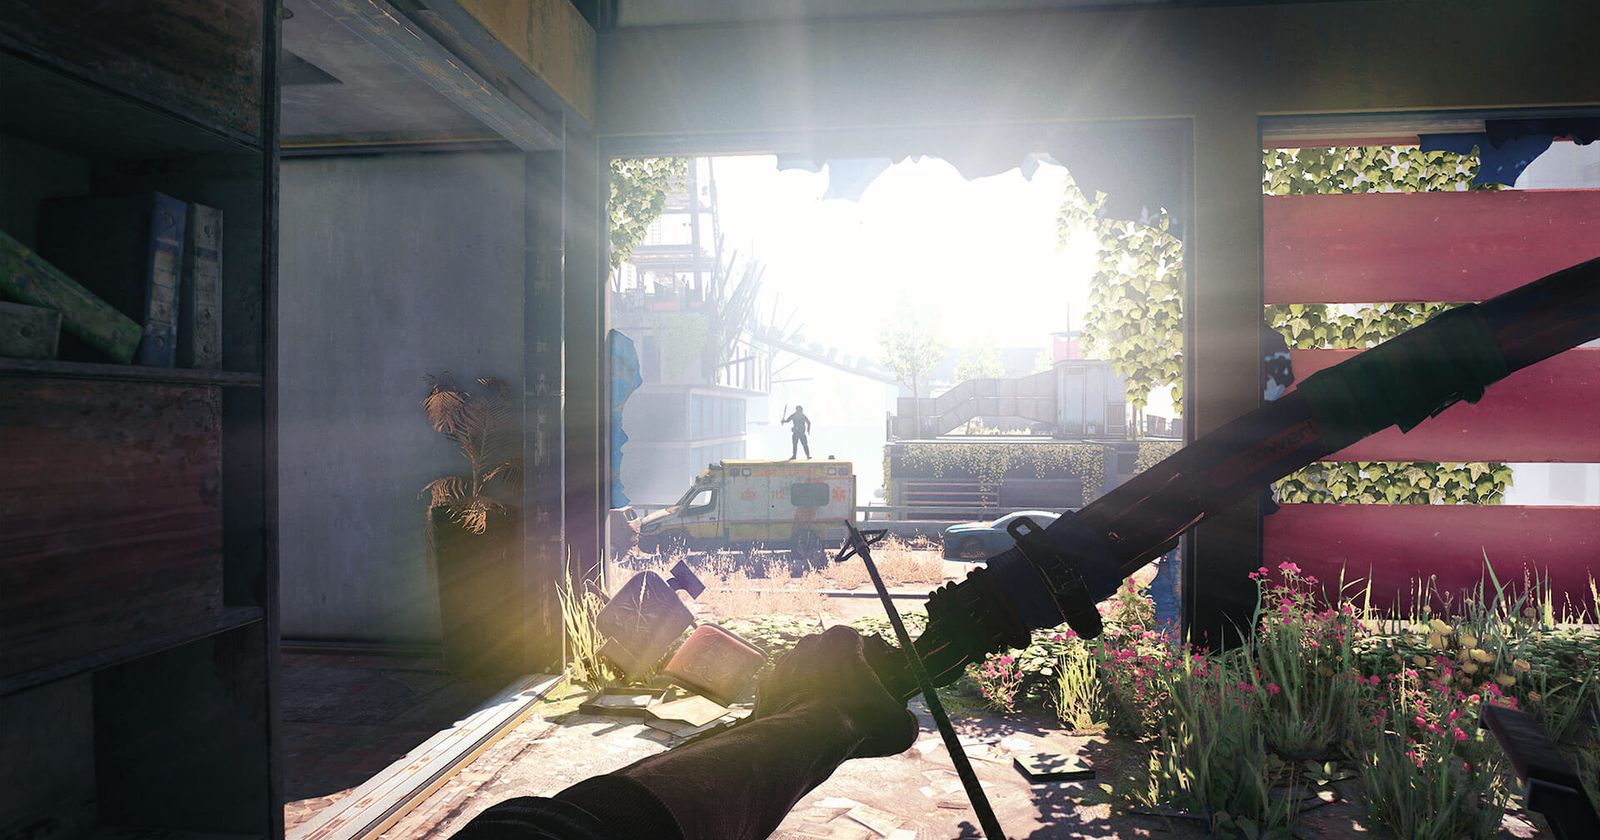 Dying Light 2 best PC and console graphics settings